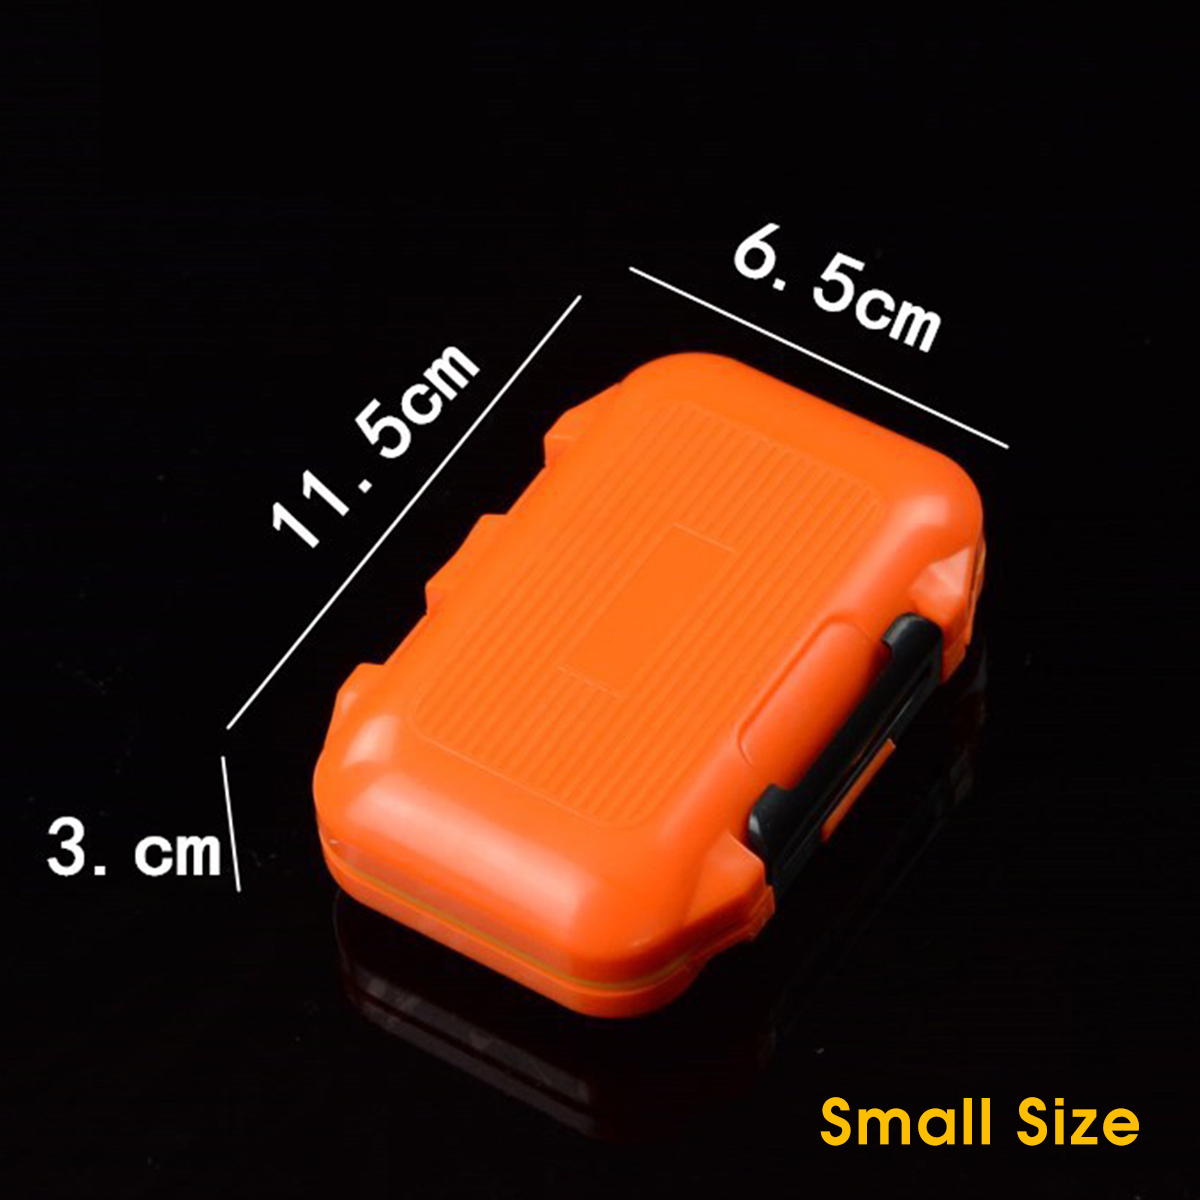 Sealed-Waterproof-Fishing-Tackle-Tray-ABS-Plastic-Fishing-Accessories-Box-Swivel-Snap-Lure--Parts-St-1634862-8